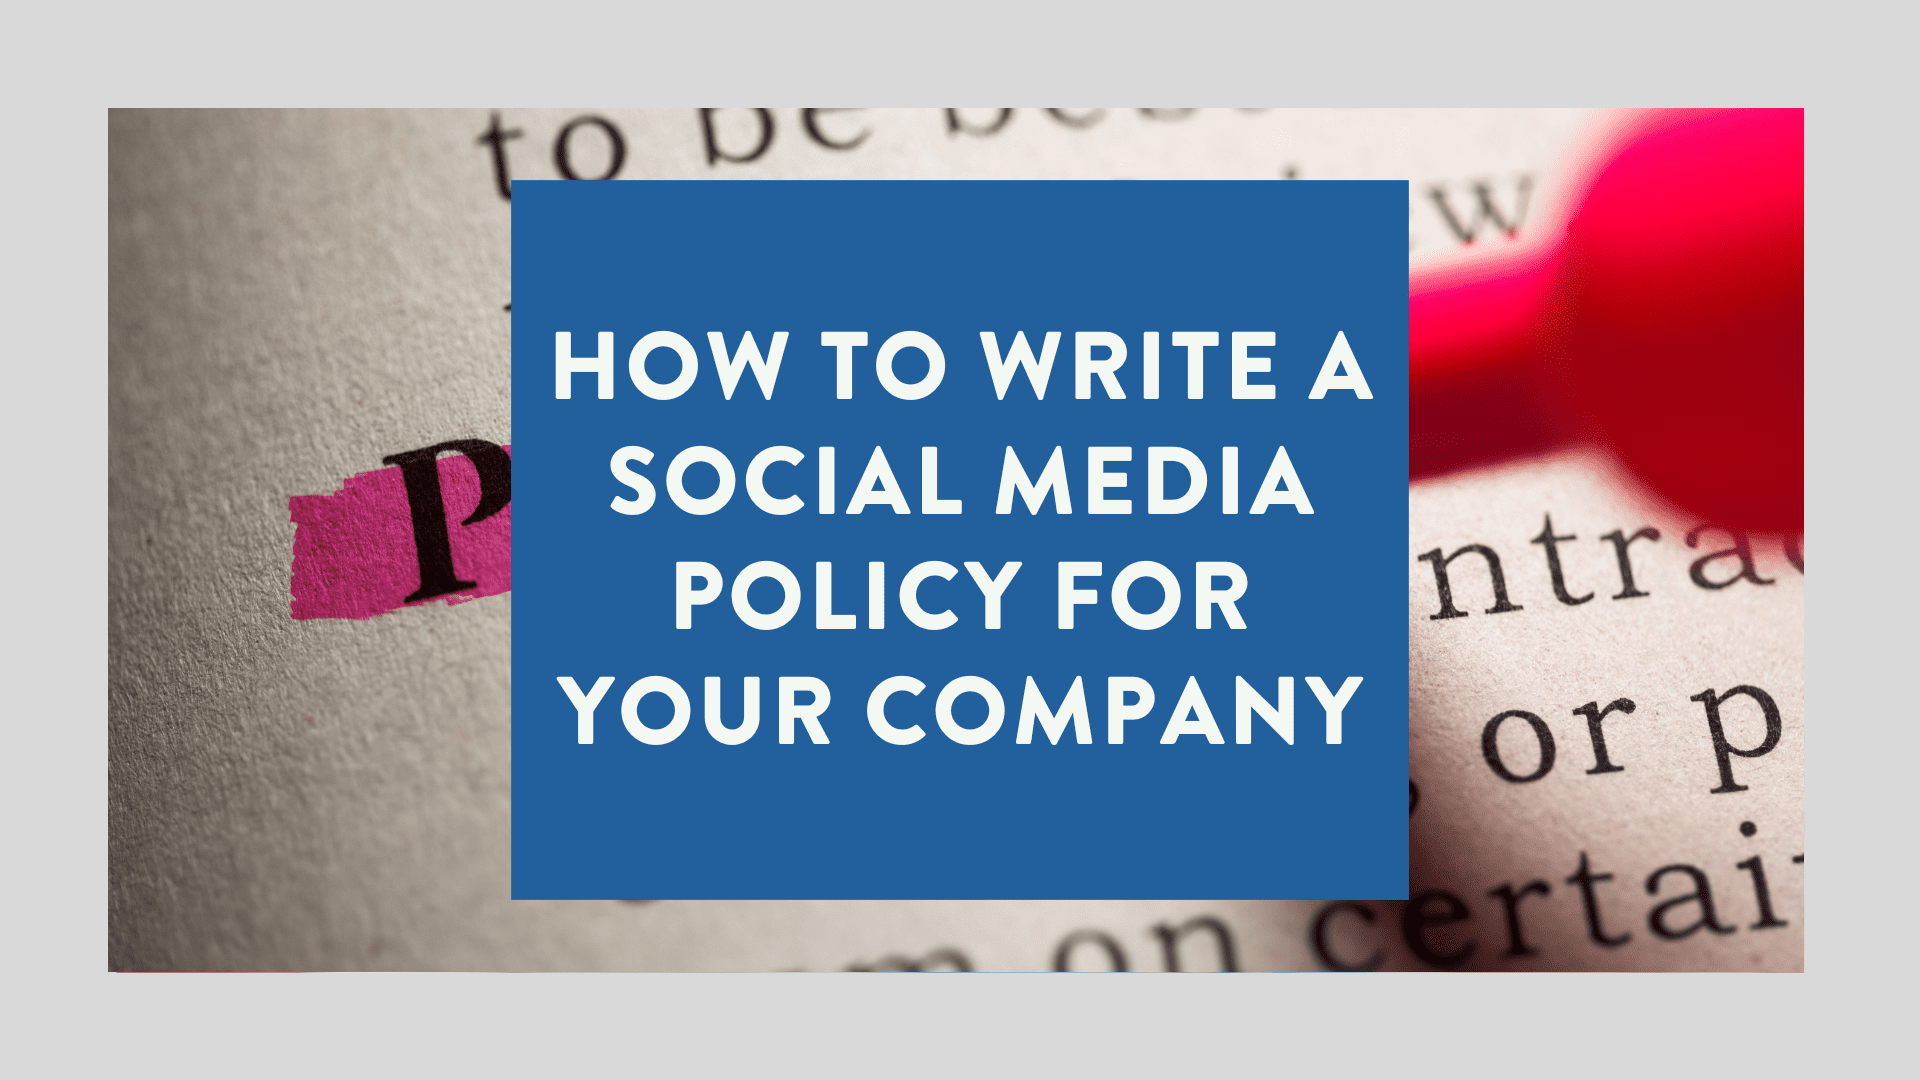 How to write a social media policy for your company